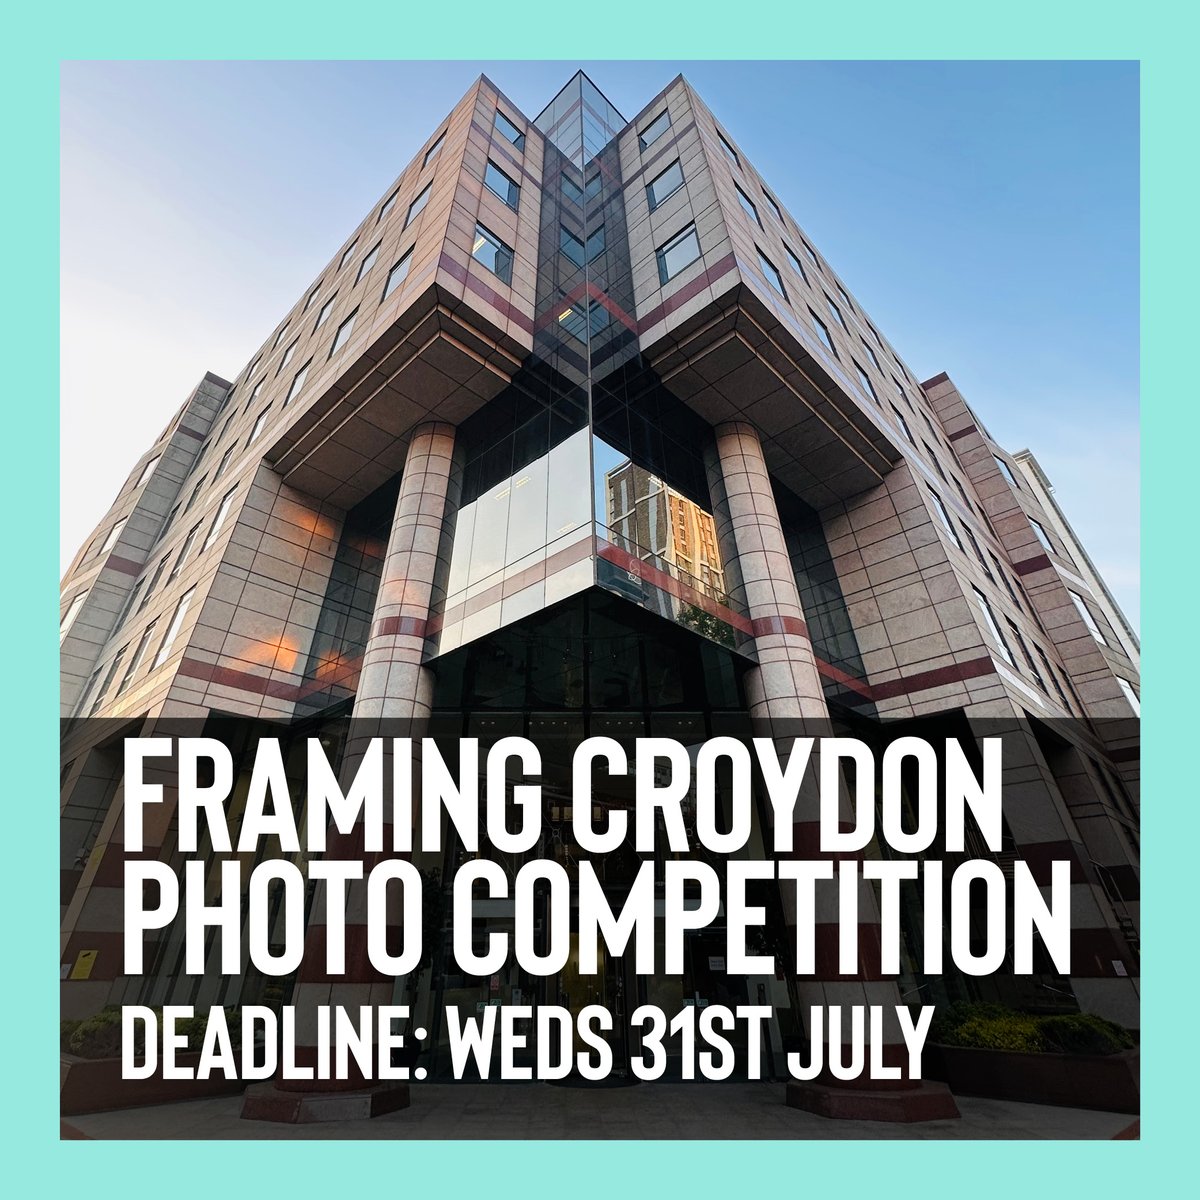 👀 We want to see your photos of Croydon – good, bad or ugly – we don’t discriminate! We just want to see your favourite images of the special place we call home. Your photo could be featured in our online exhibition launching this May! 👉Find out more, visit the link in bio...